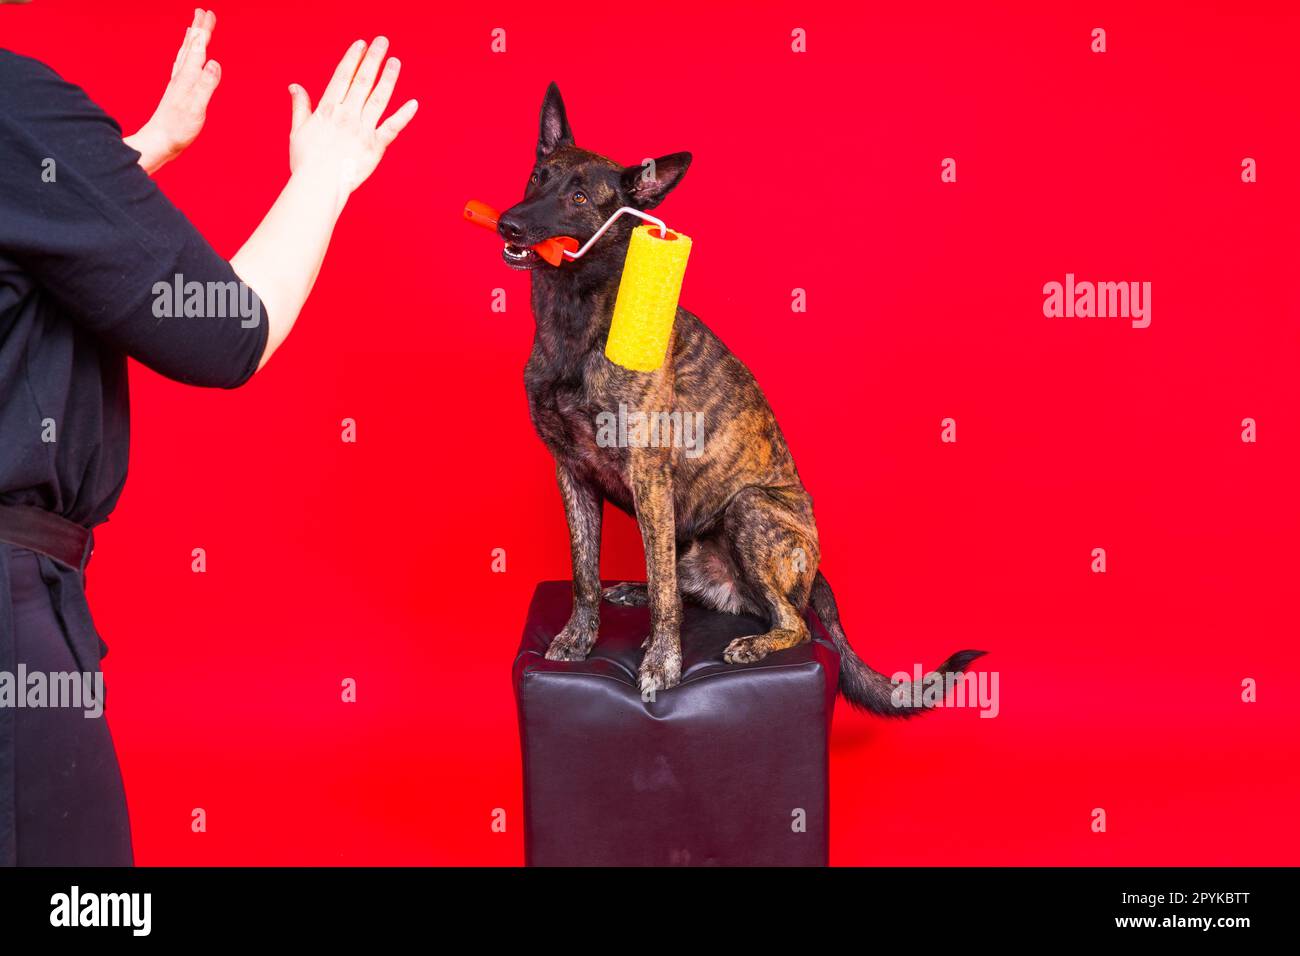 A dog builder is holding roller brusht. Red yellow background. Isolated. Dutch shepherd Stock Photo